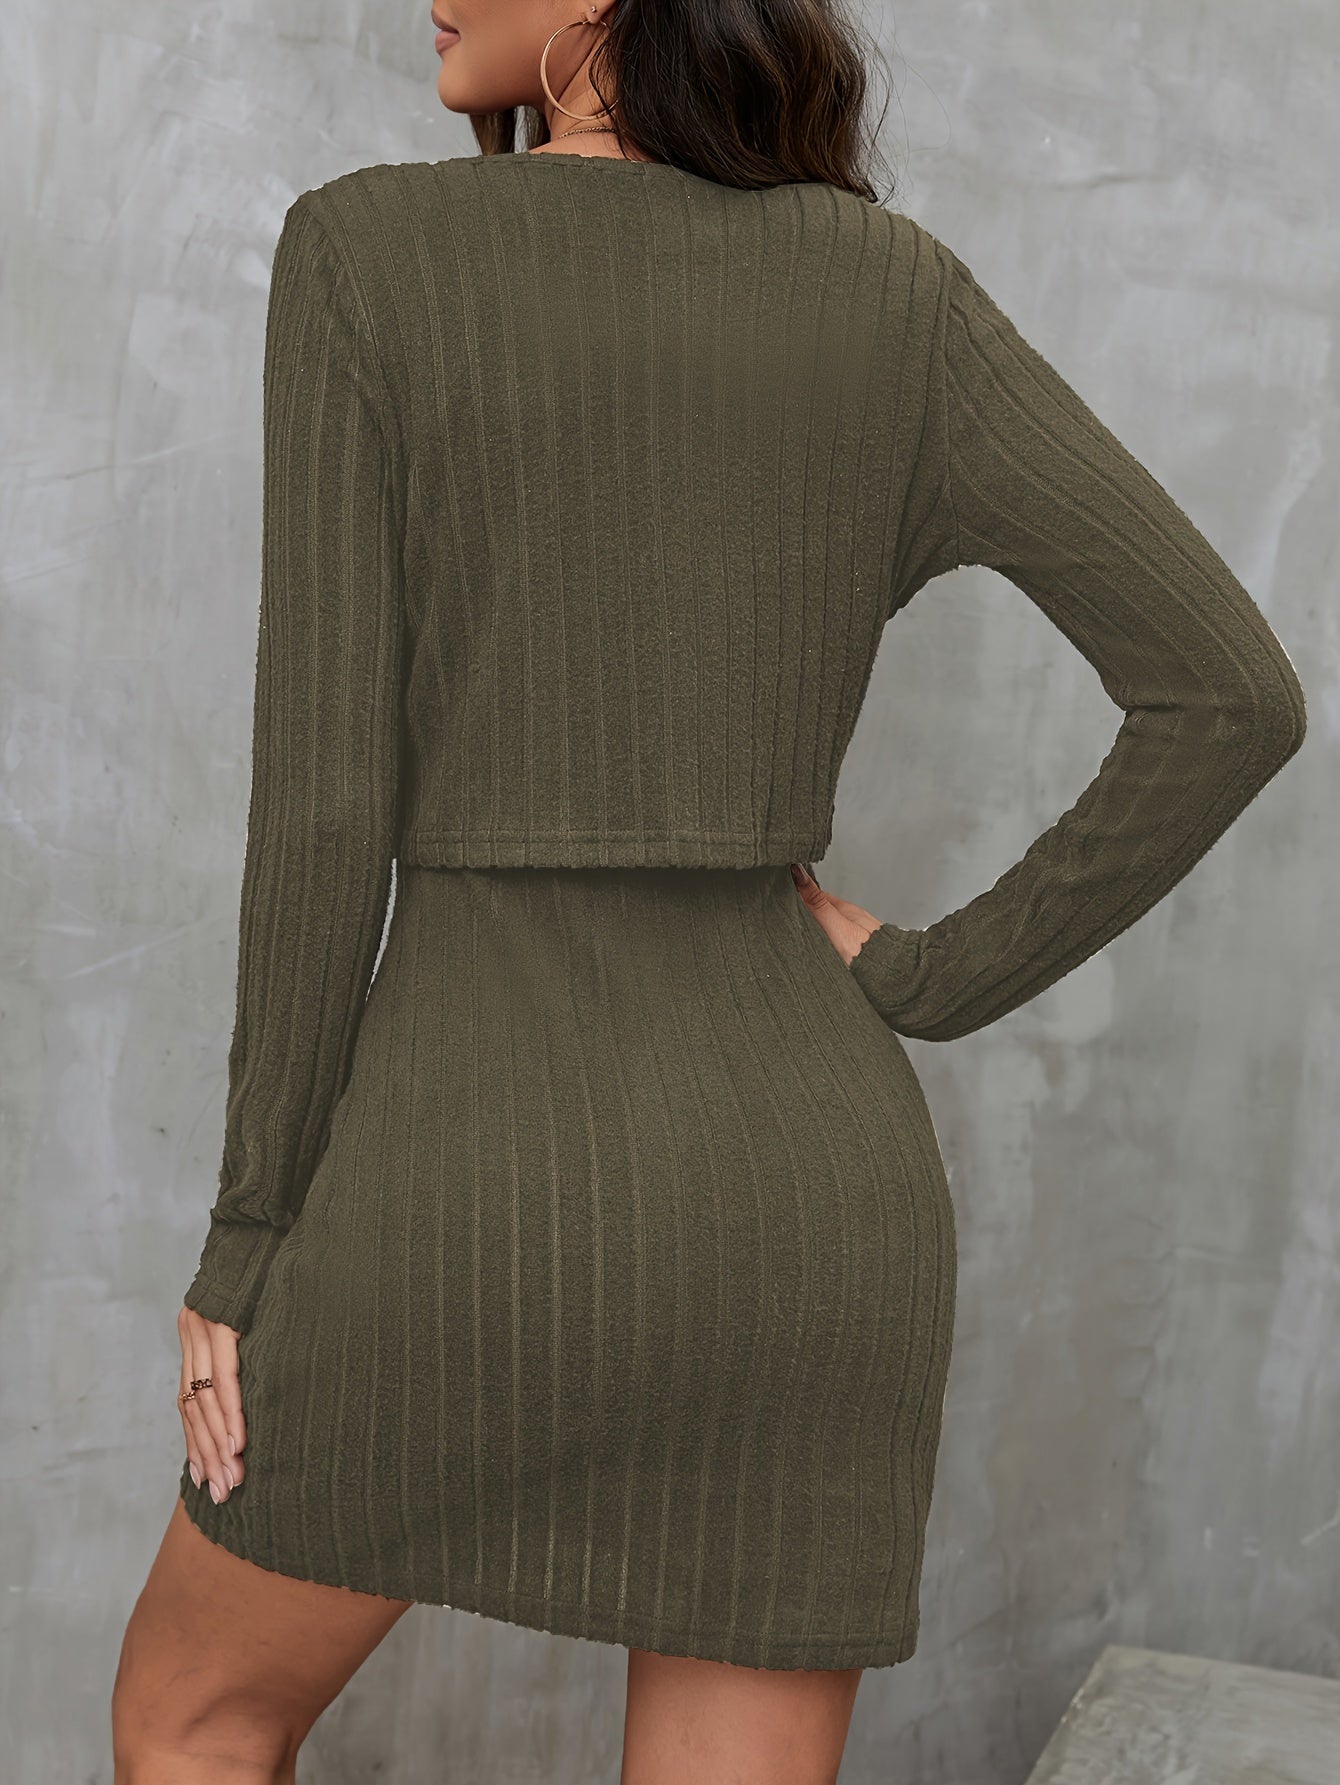 Ribbed Solid Two-piece Set, Button Front Long Sleeve Cardigan & Spaghetti Strap Bodycon Dress Outfits, Women's Clothing